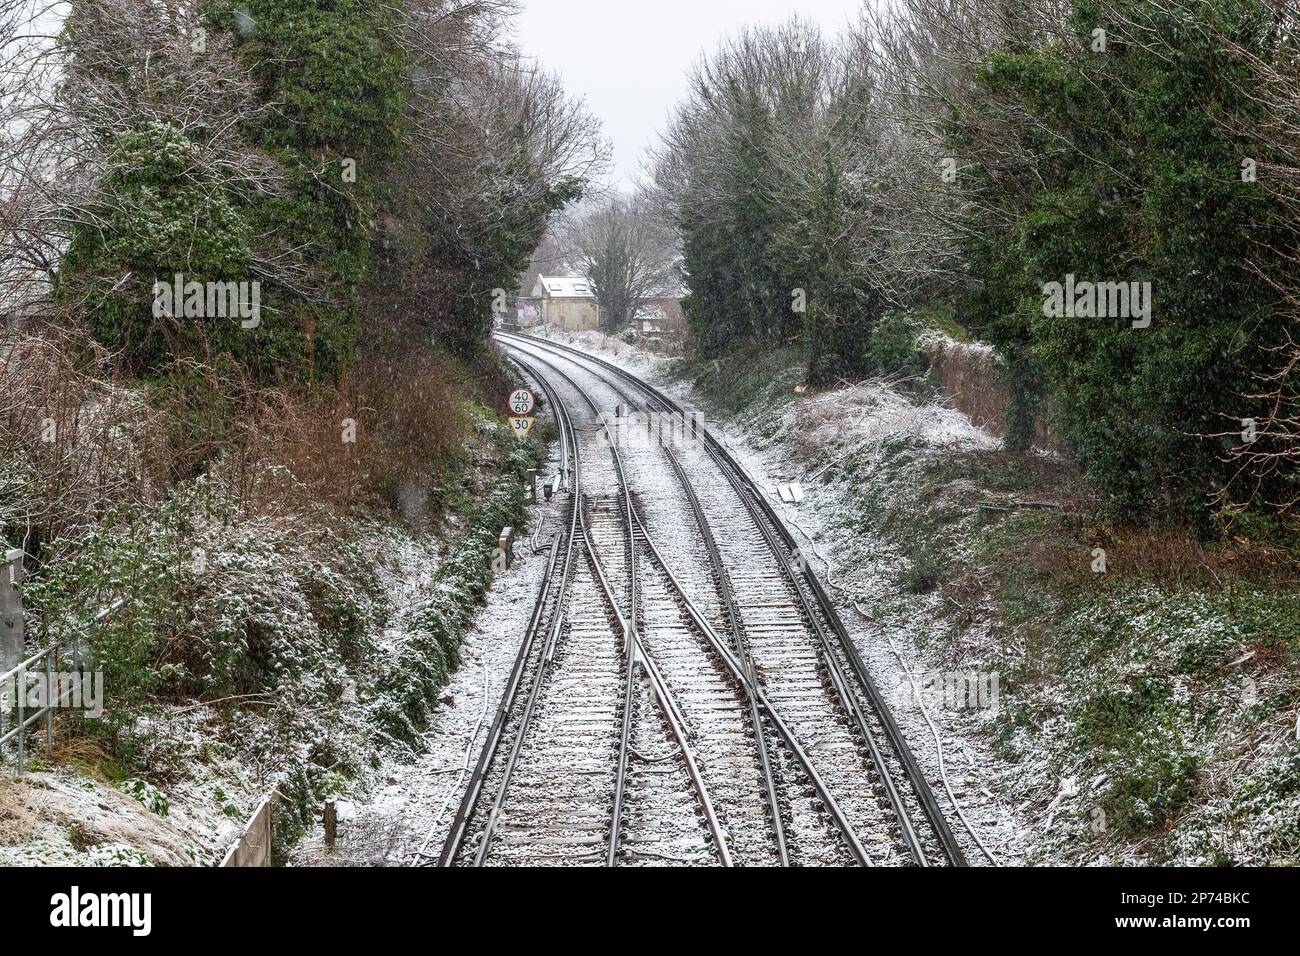 Railway tracks in London during a snowy winter day. Stock Photo